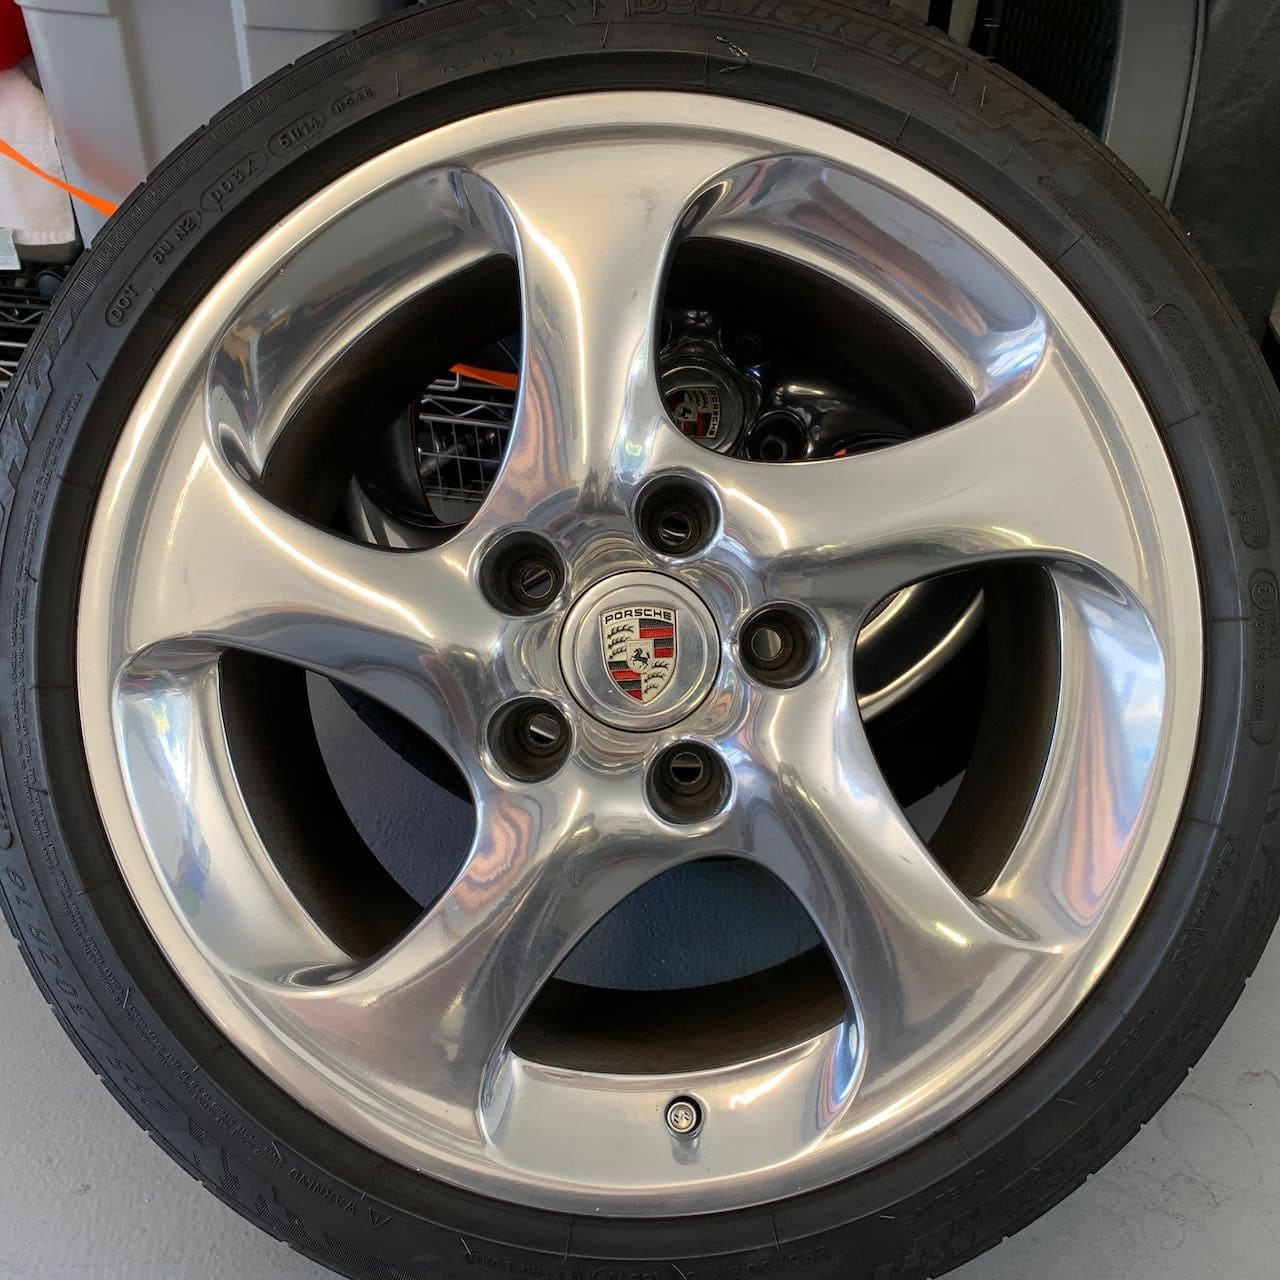 Wheels and Tires/Axles - 993/996TT Turbo Twist Wheels+ Tires - Used - 1996 to 2005 Porsche 911 - San Jose, CA 95125, United States